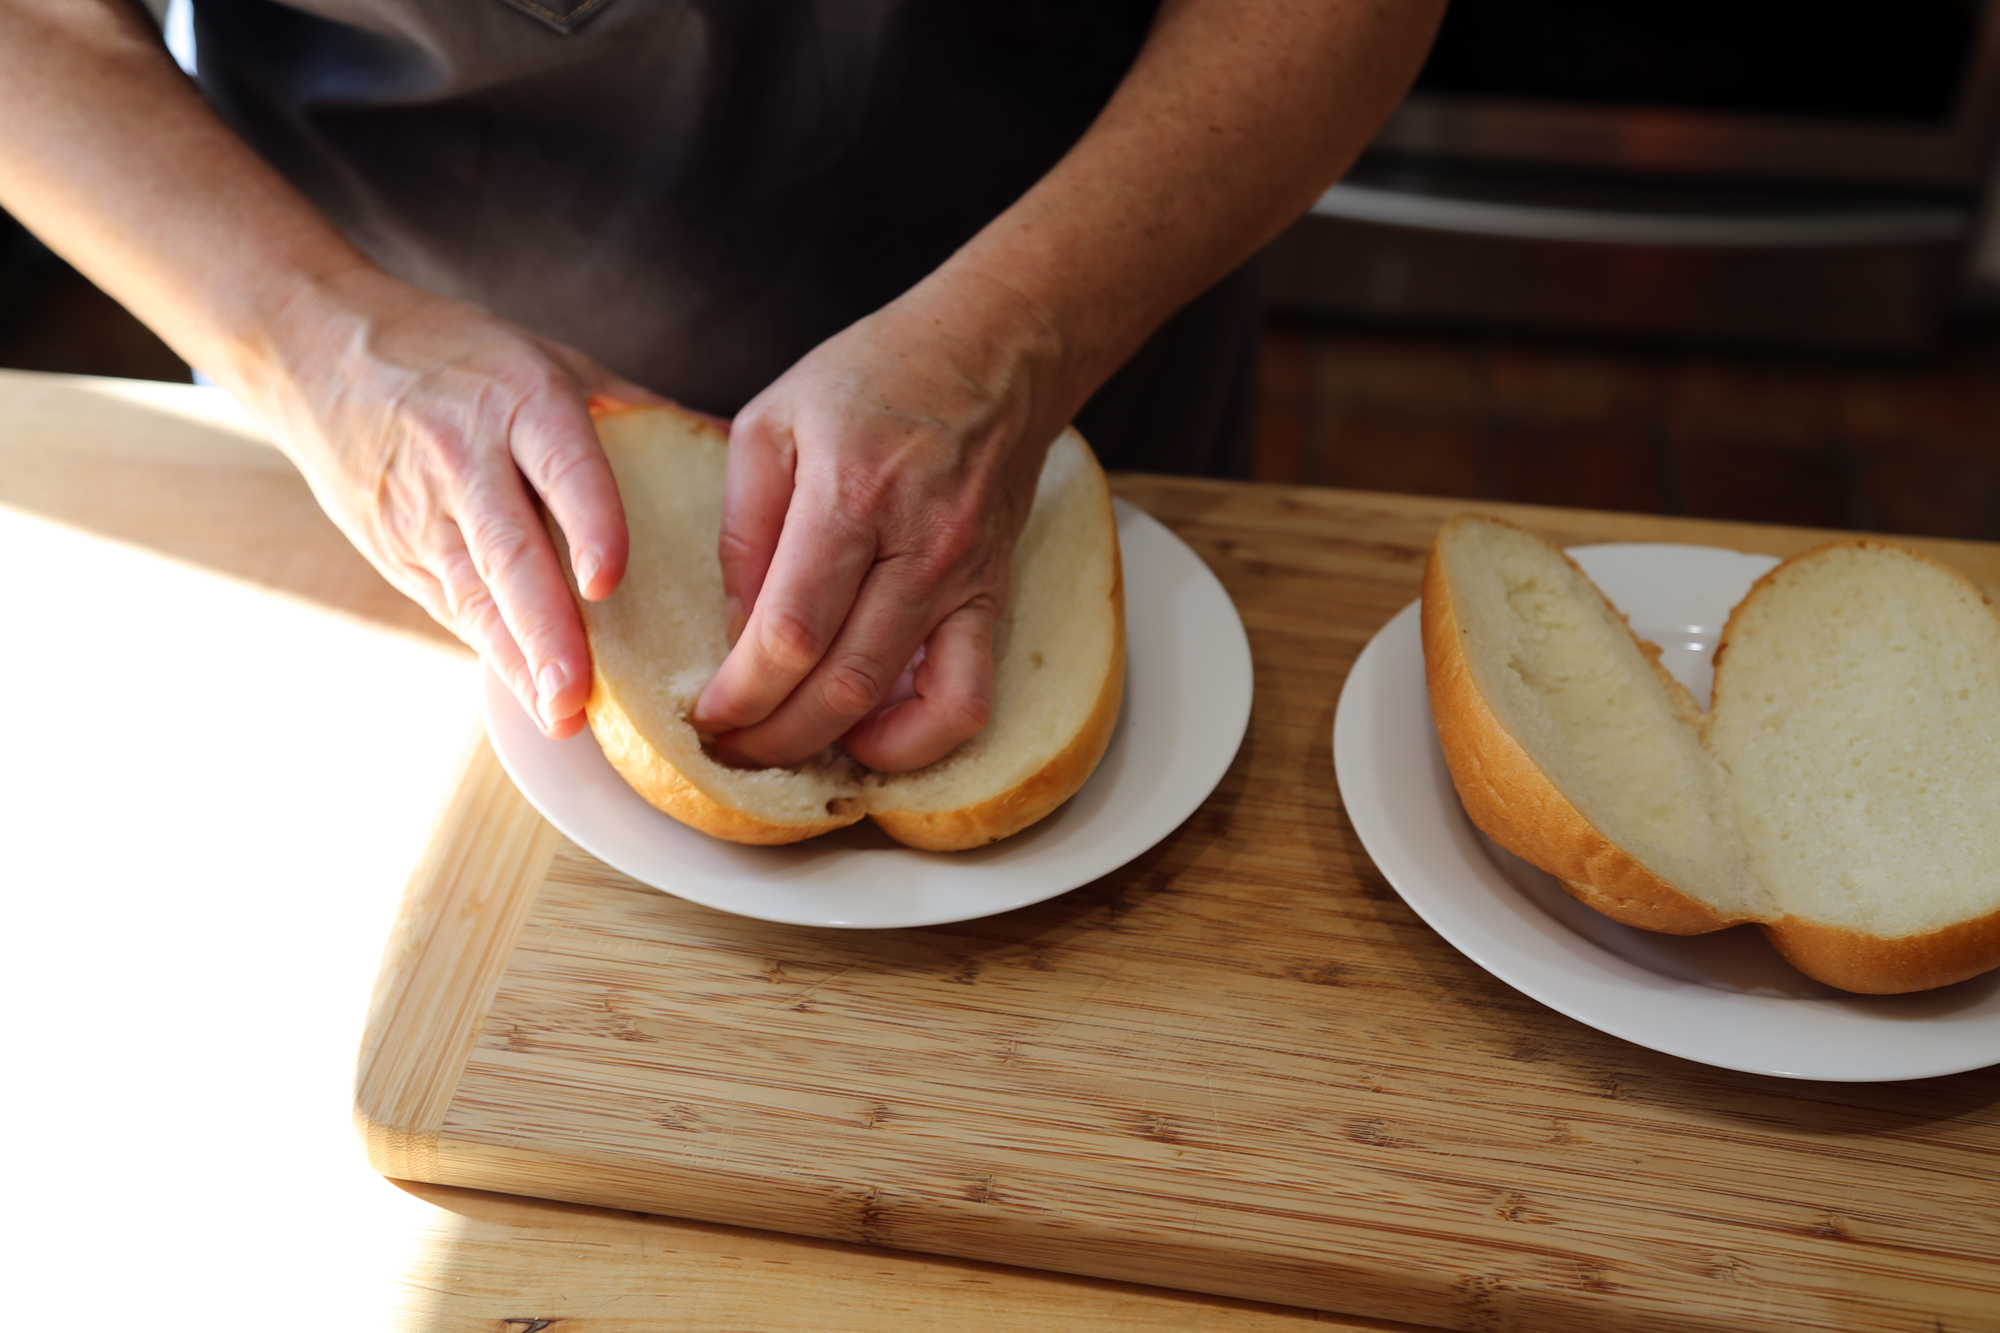 To make the sandwiches, split the rolls, and roughly hollow out the top.